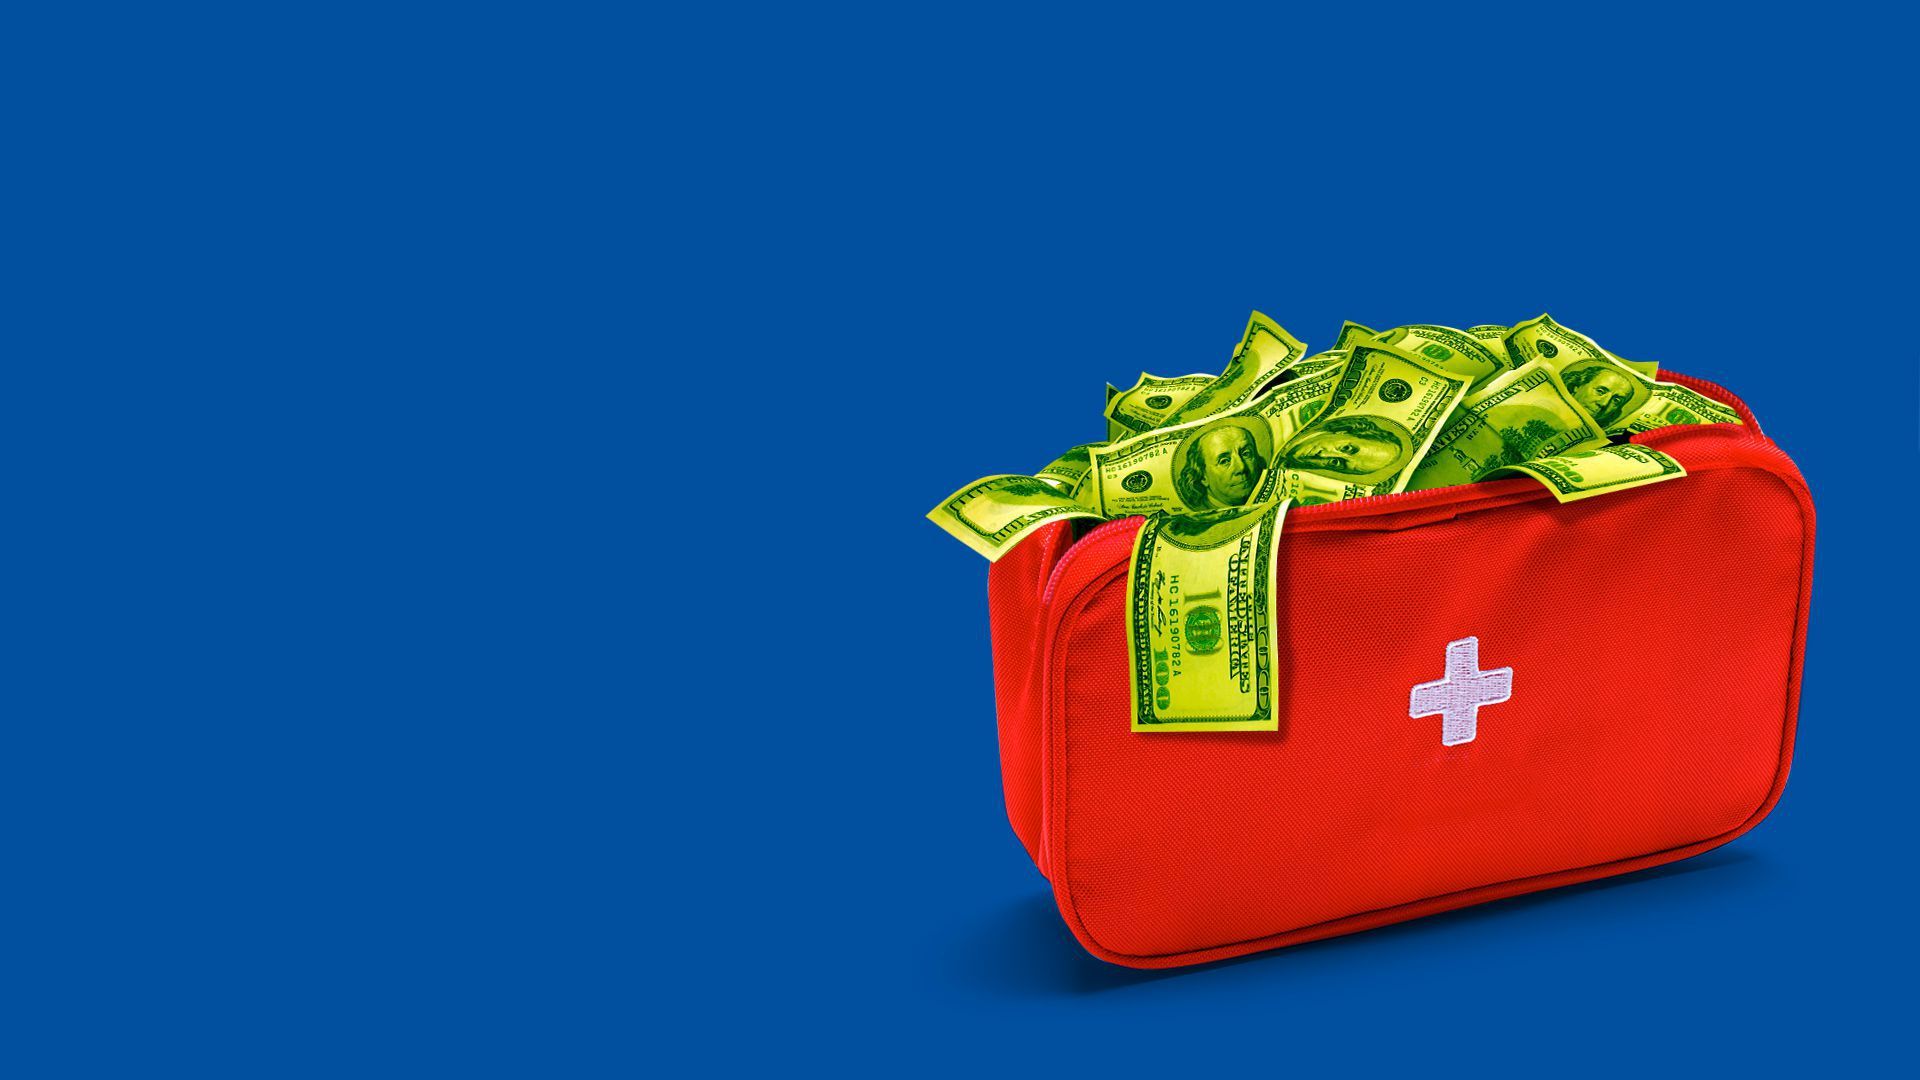 Illustration of a first aid kit filled with cash.